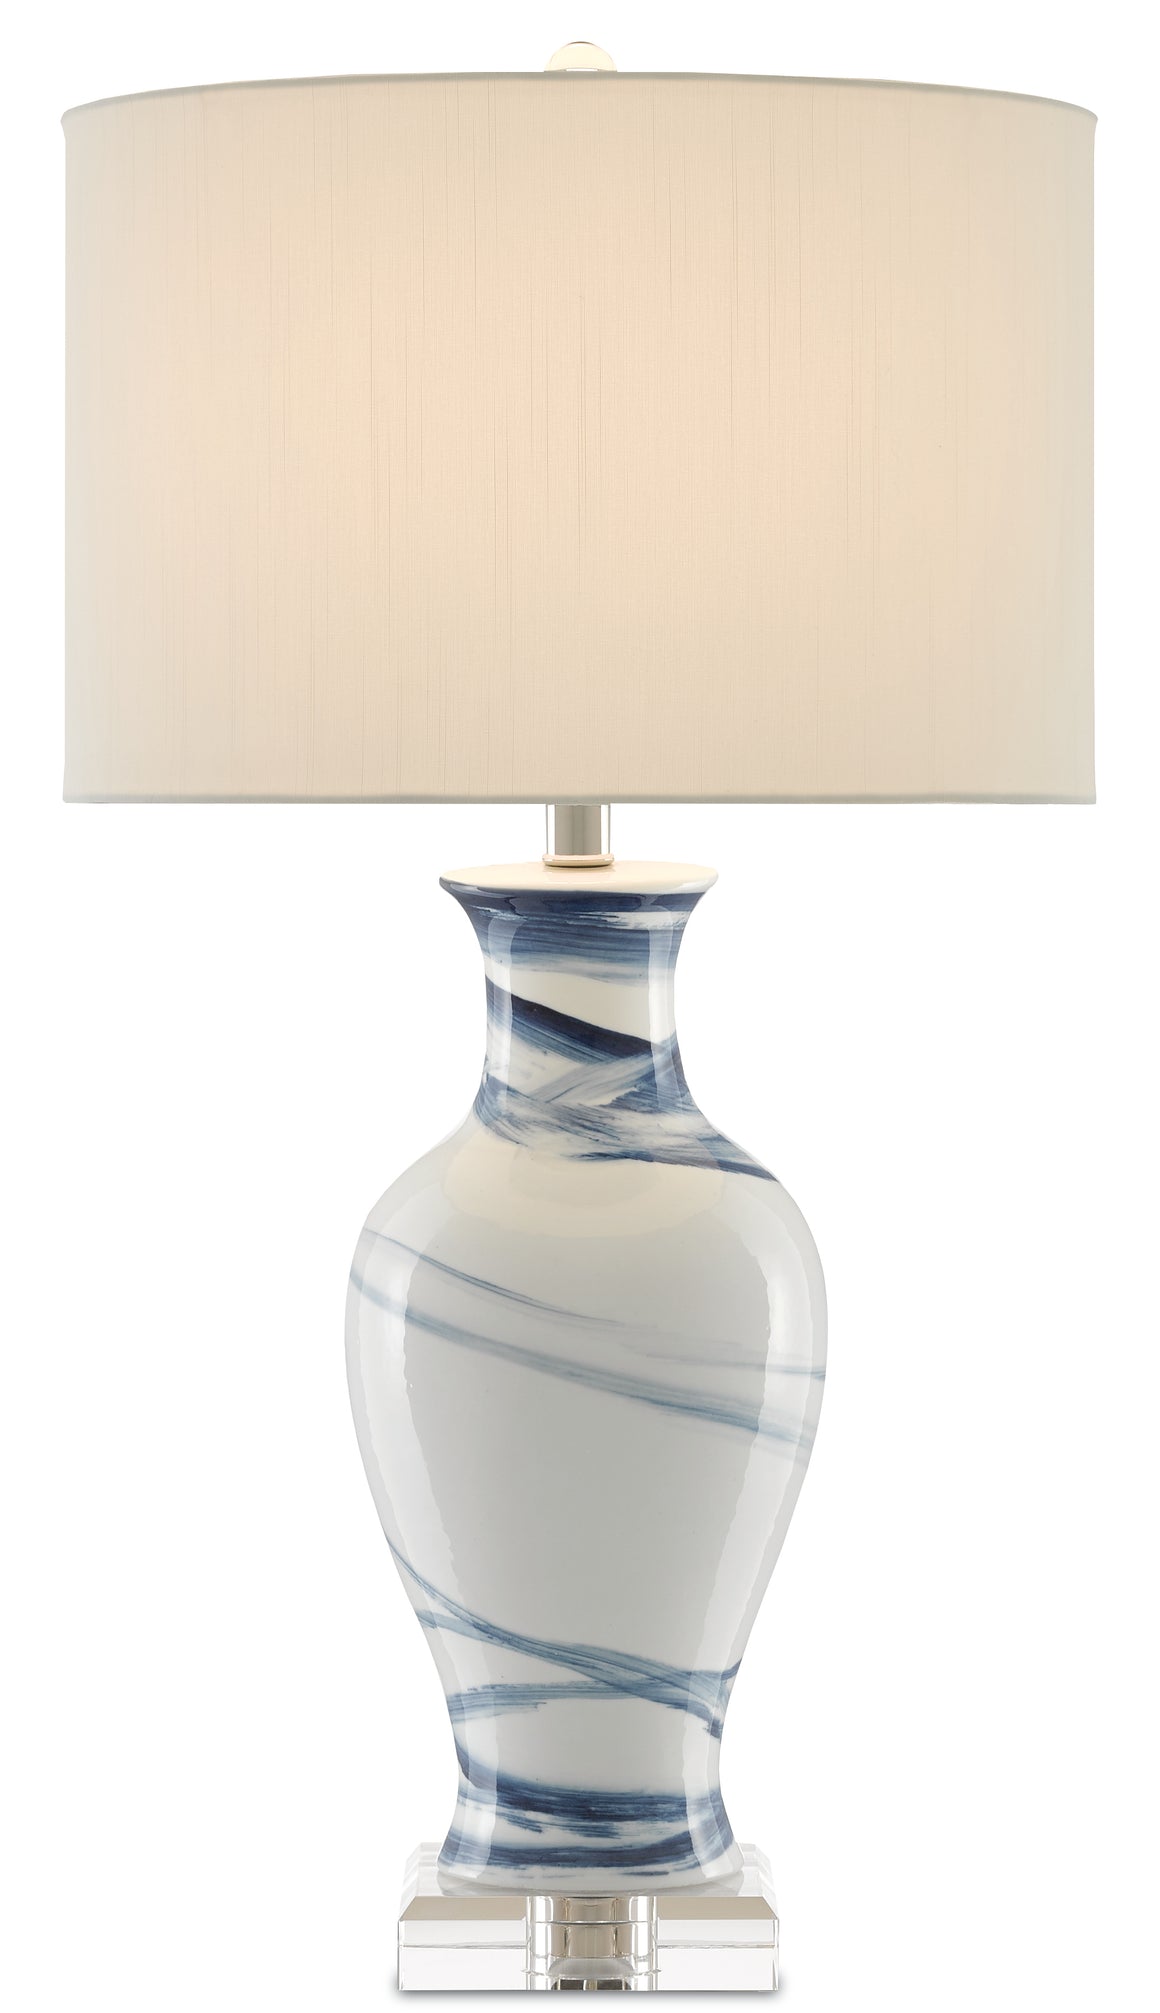 Currey and Company Hanni Table Lamp